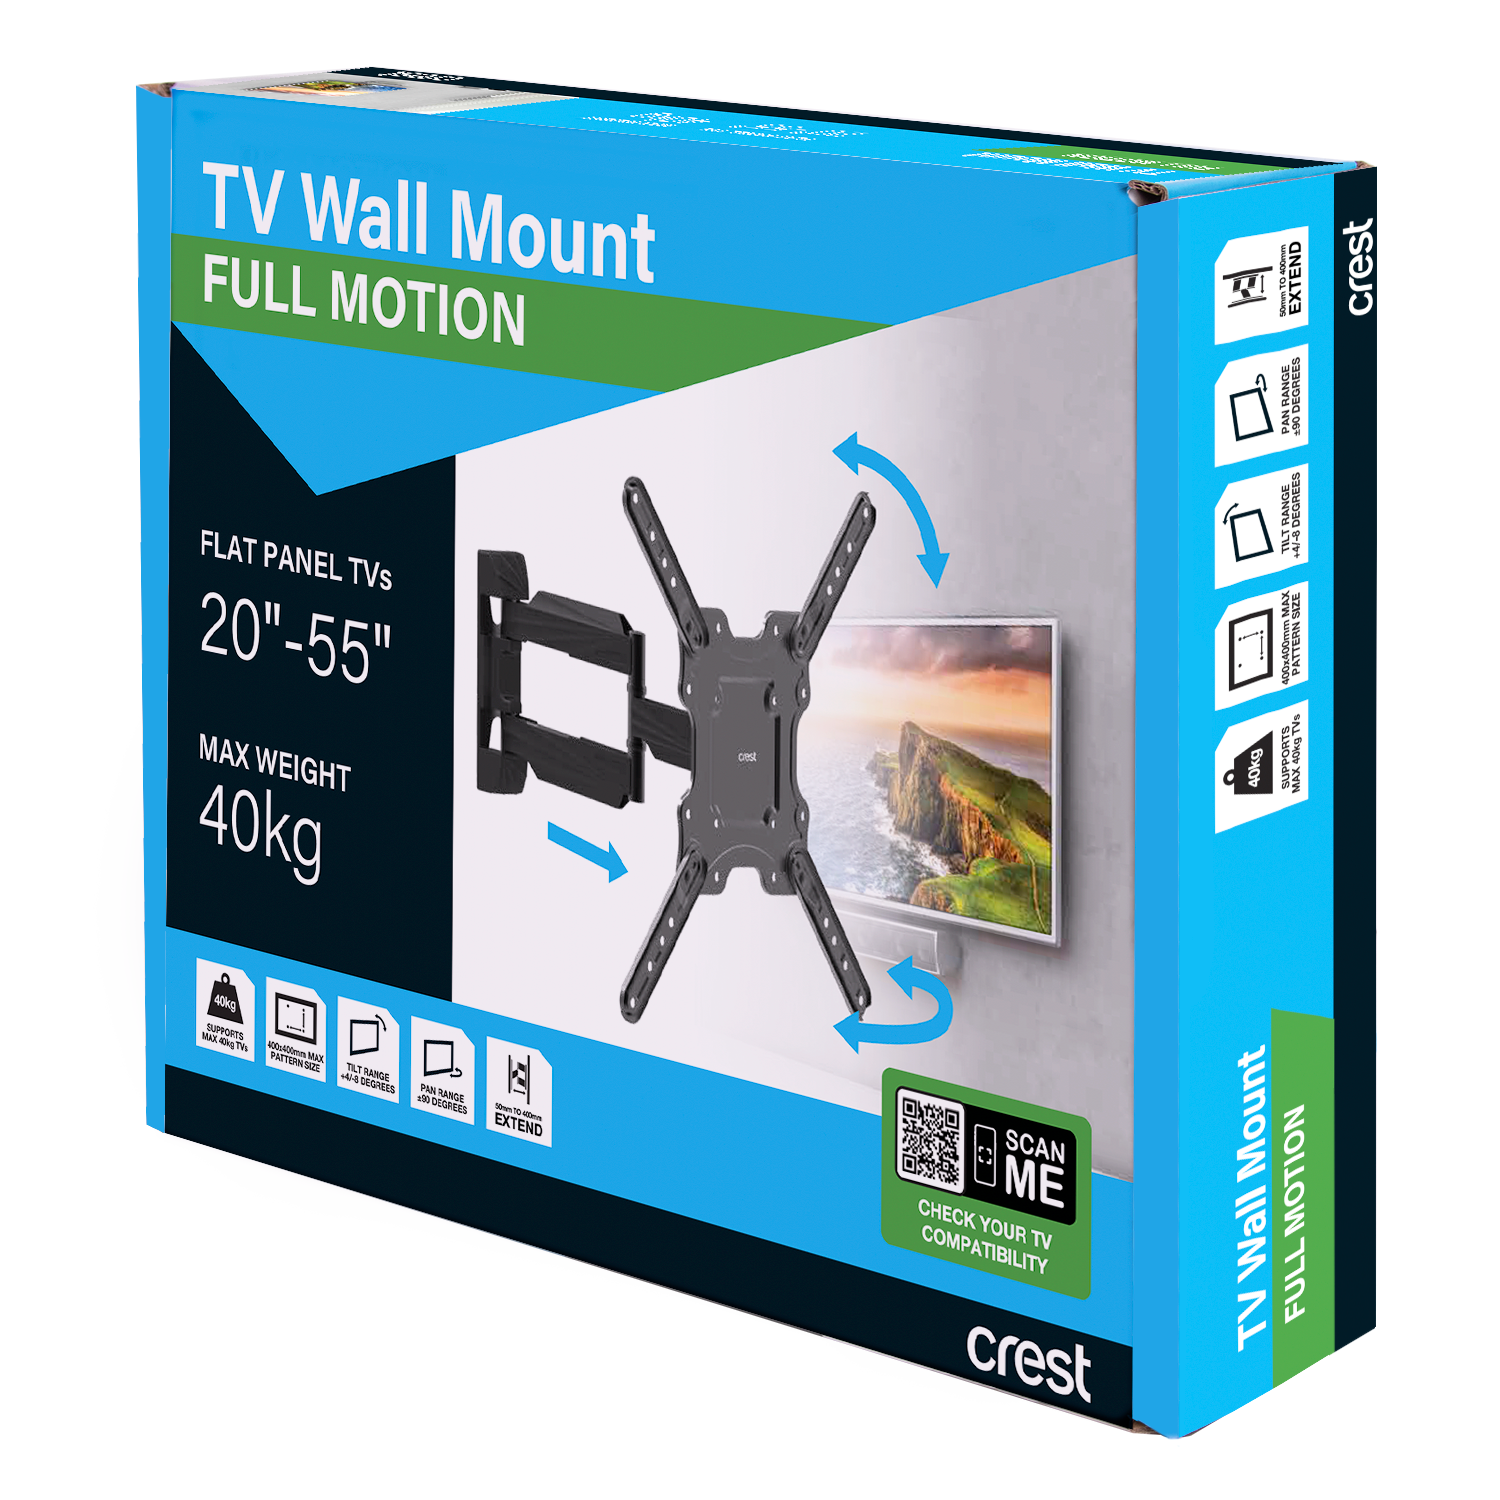 Full Motion TV Wall Mount - 20" to 55"